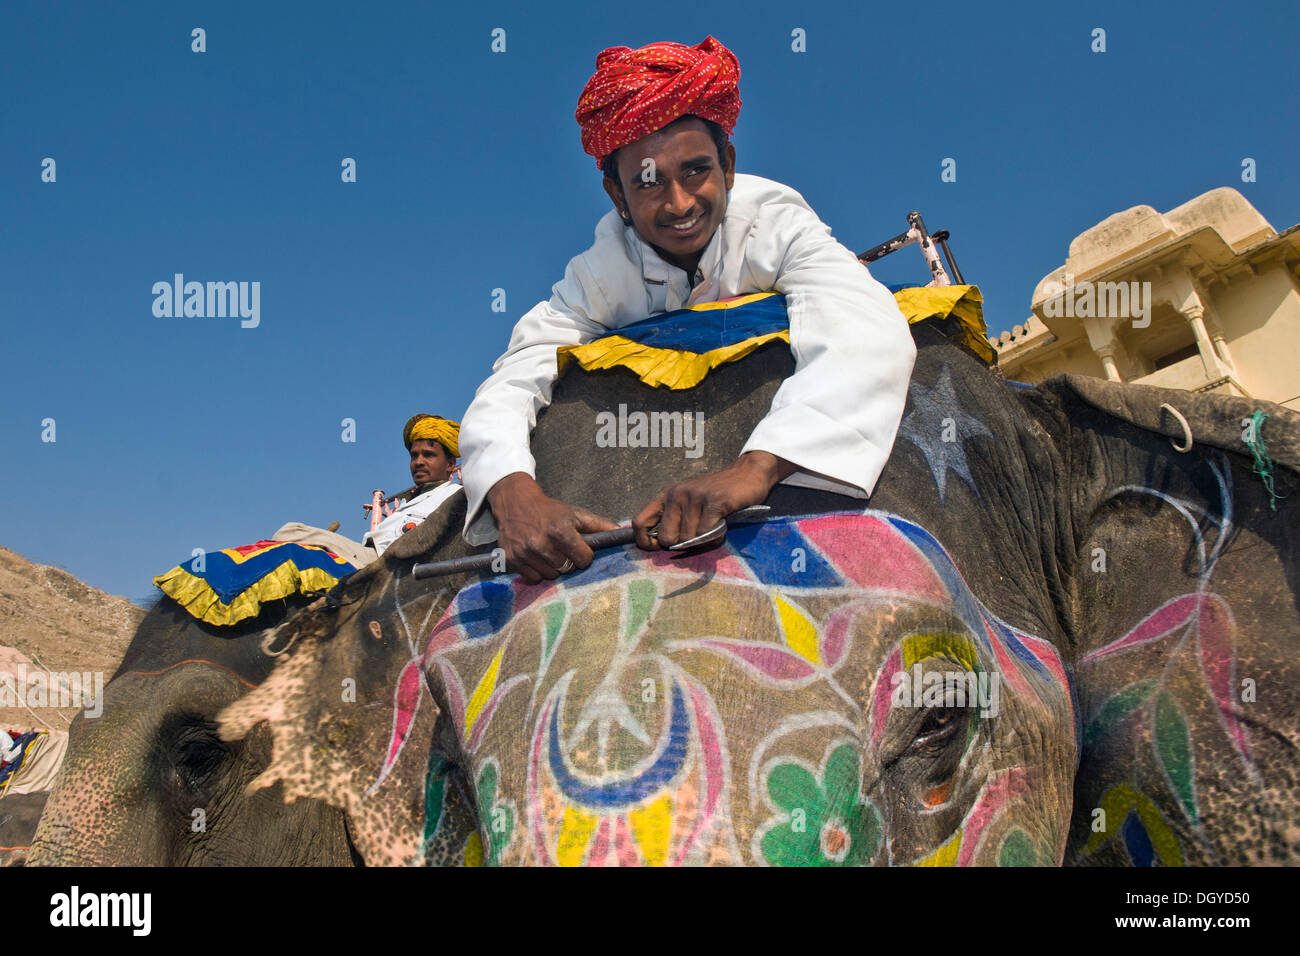 Mahout or elephant driver on a painted elephant, Amer Fort or Amber Fort, Jaipur, Rajasthan, India, Asia Stock Photo